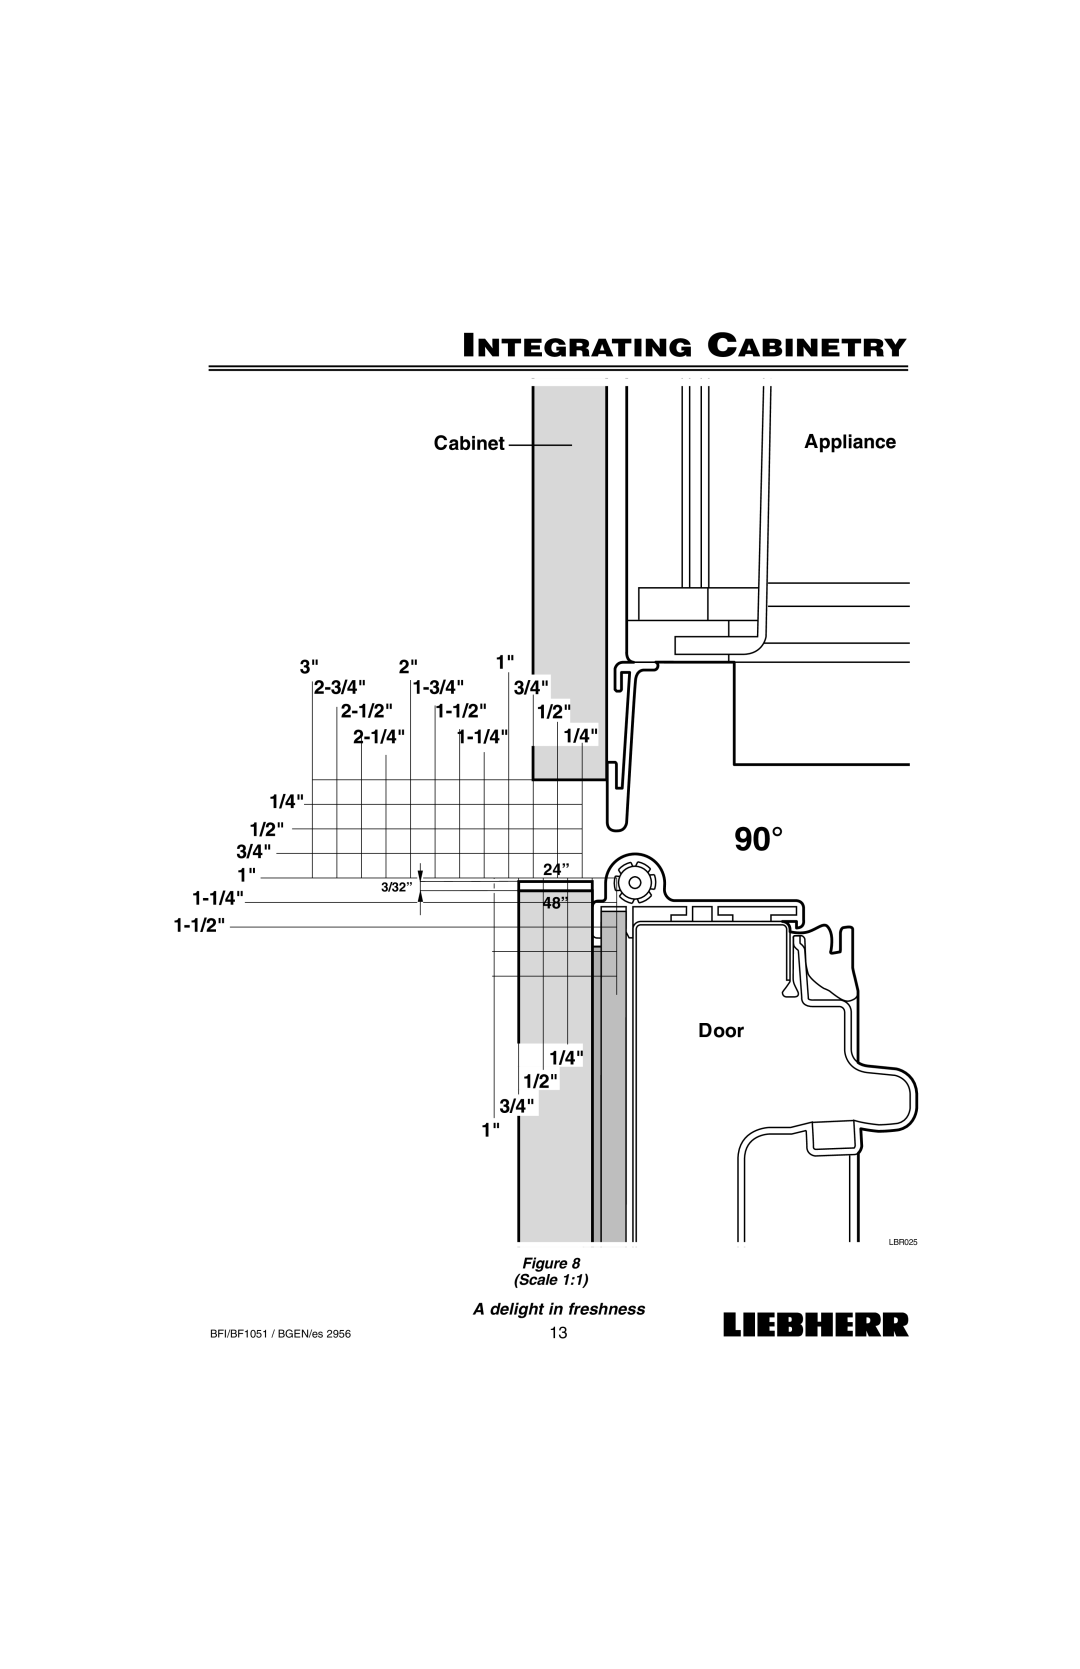 Liebherr BF1051, BFI1051 installation instructions Integrating Cabinetry, A delight in freshness, Figure Scale 1:1, LBR025 